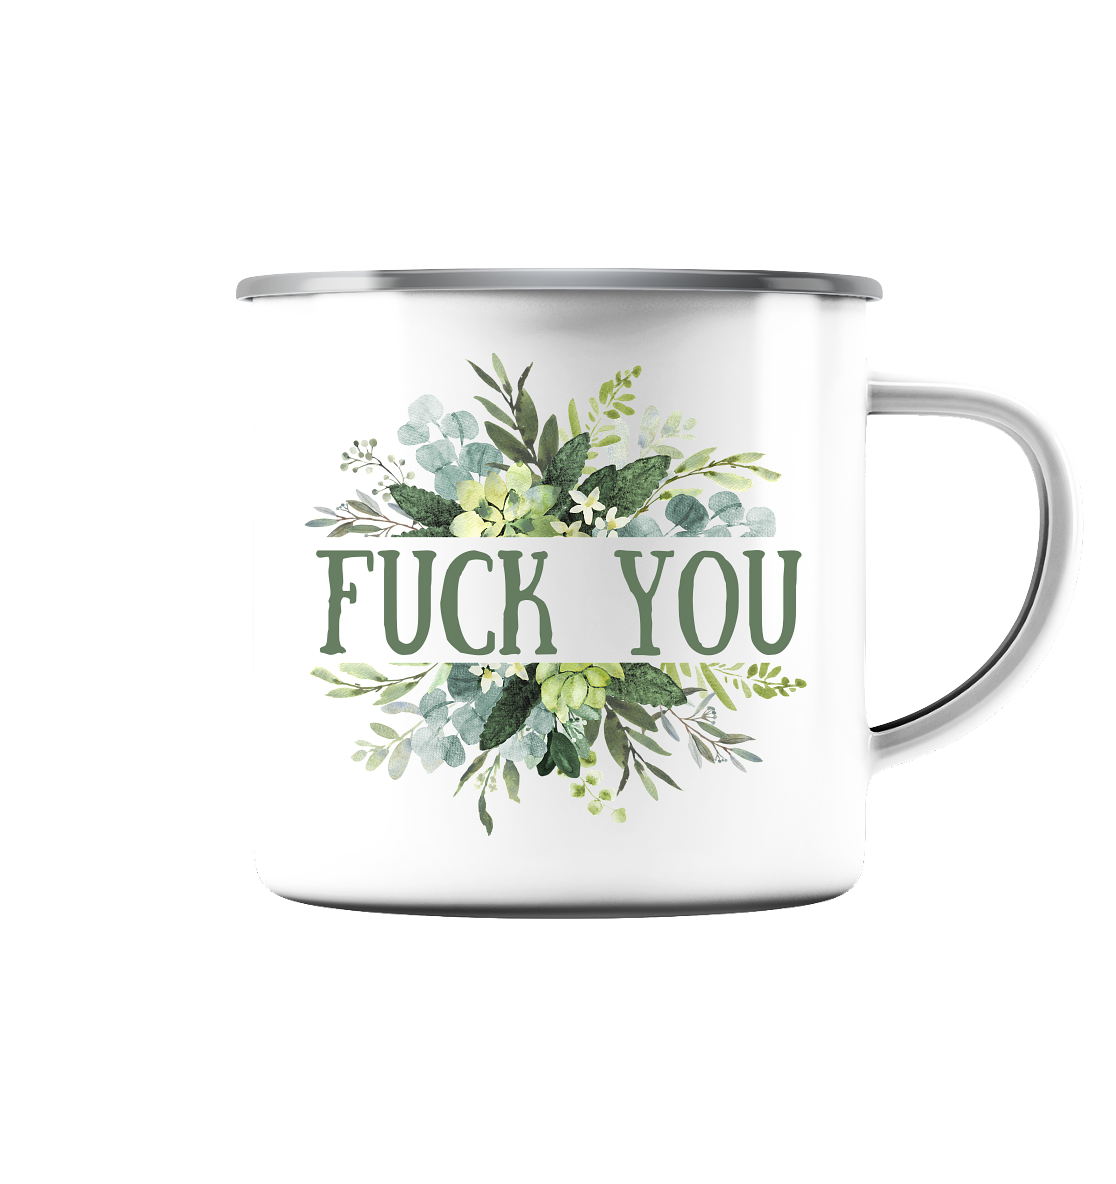 FUCK YOU - Emaille Tasse (Silber)